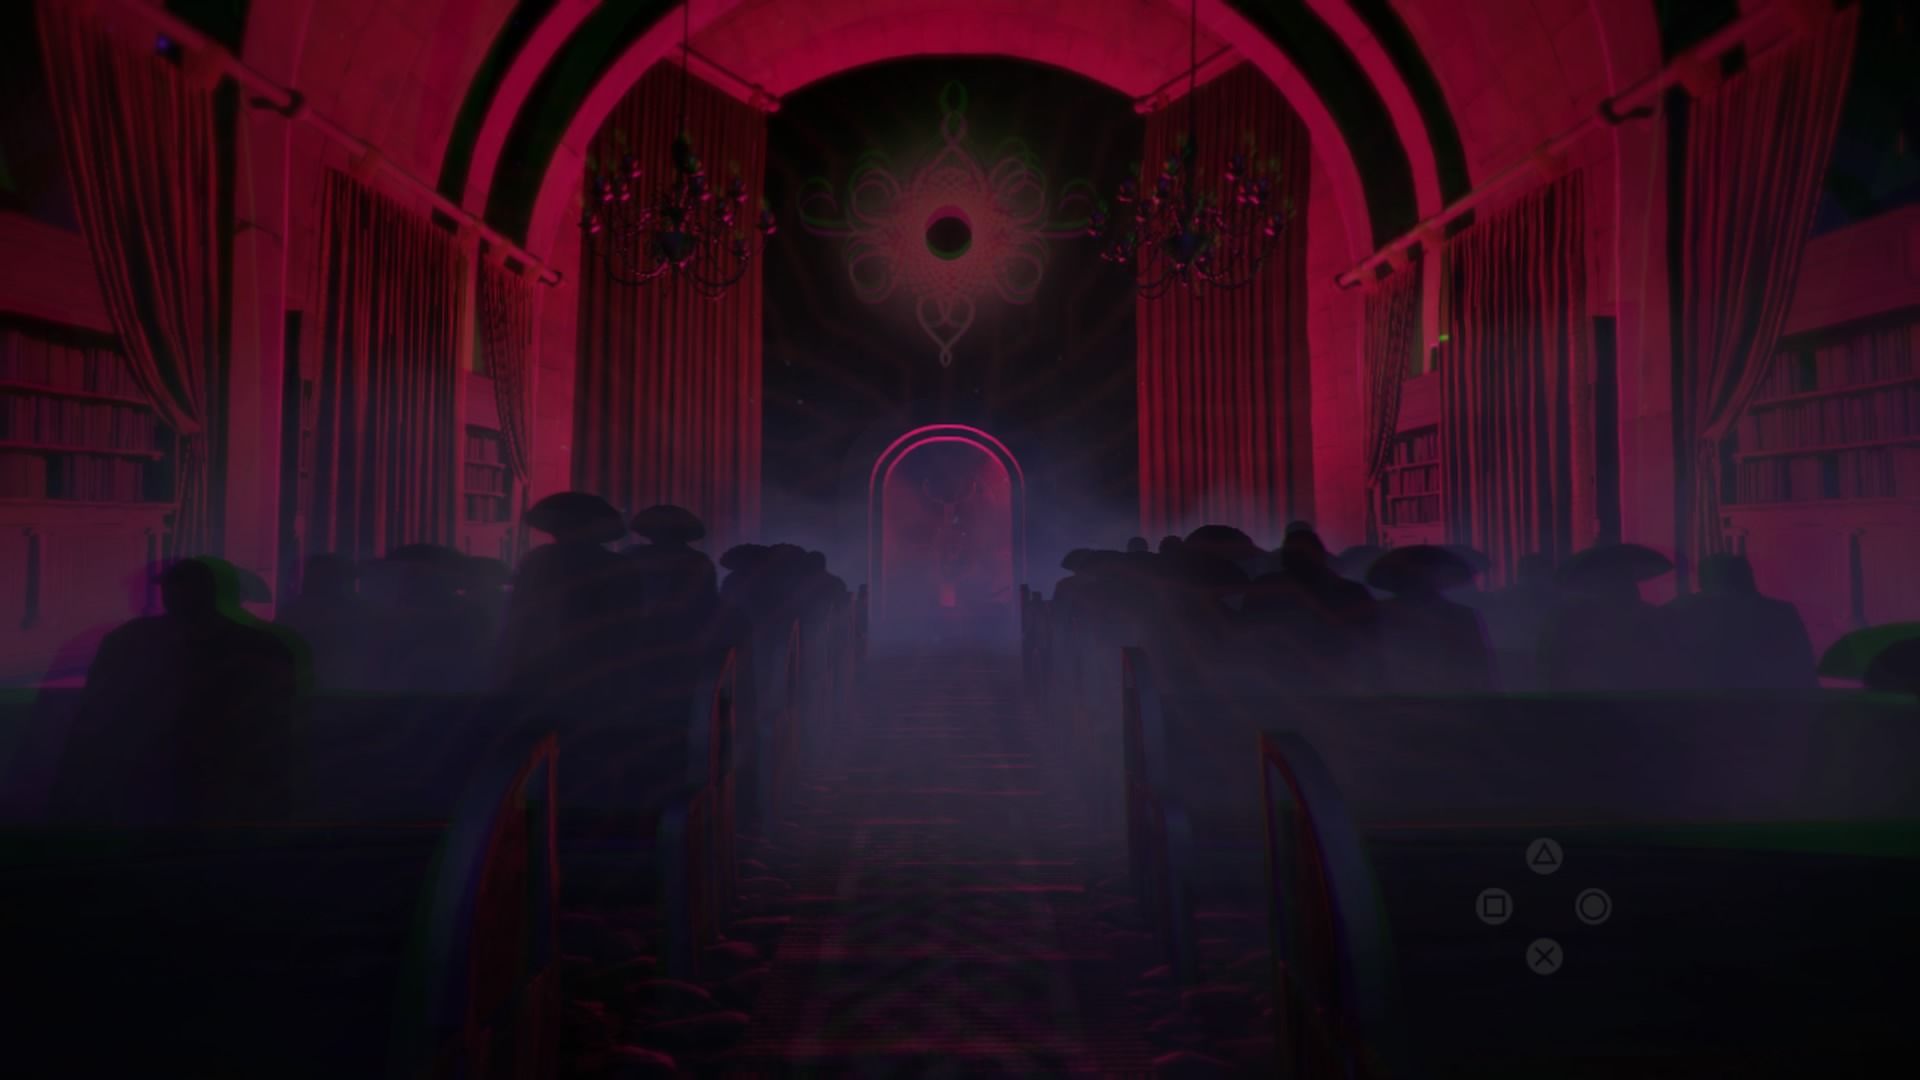 Jett The Far Shore Things That Make No Sense a wide shot of a misty room with purple and red lighting and a group of shadowy figures stood before a doorway